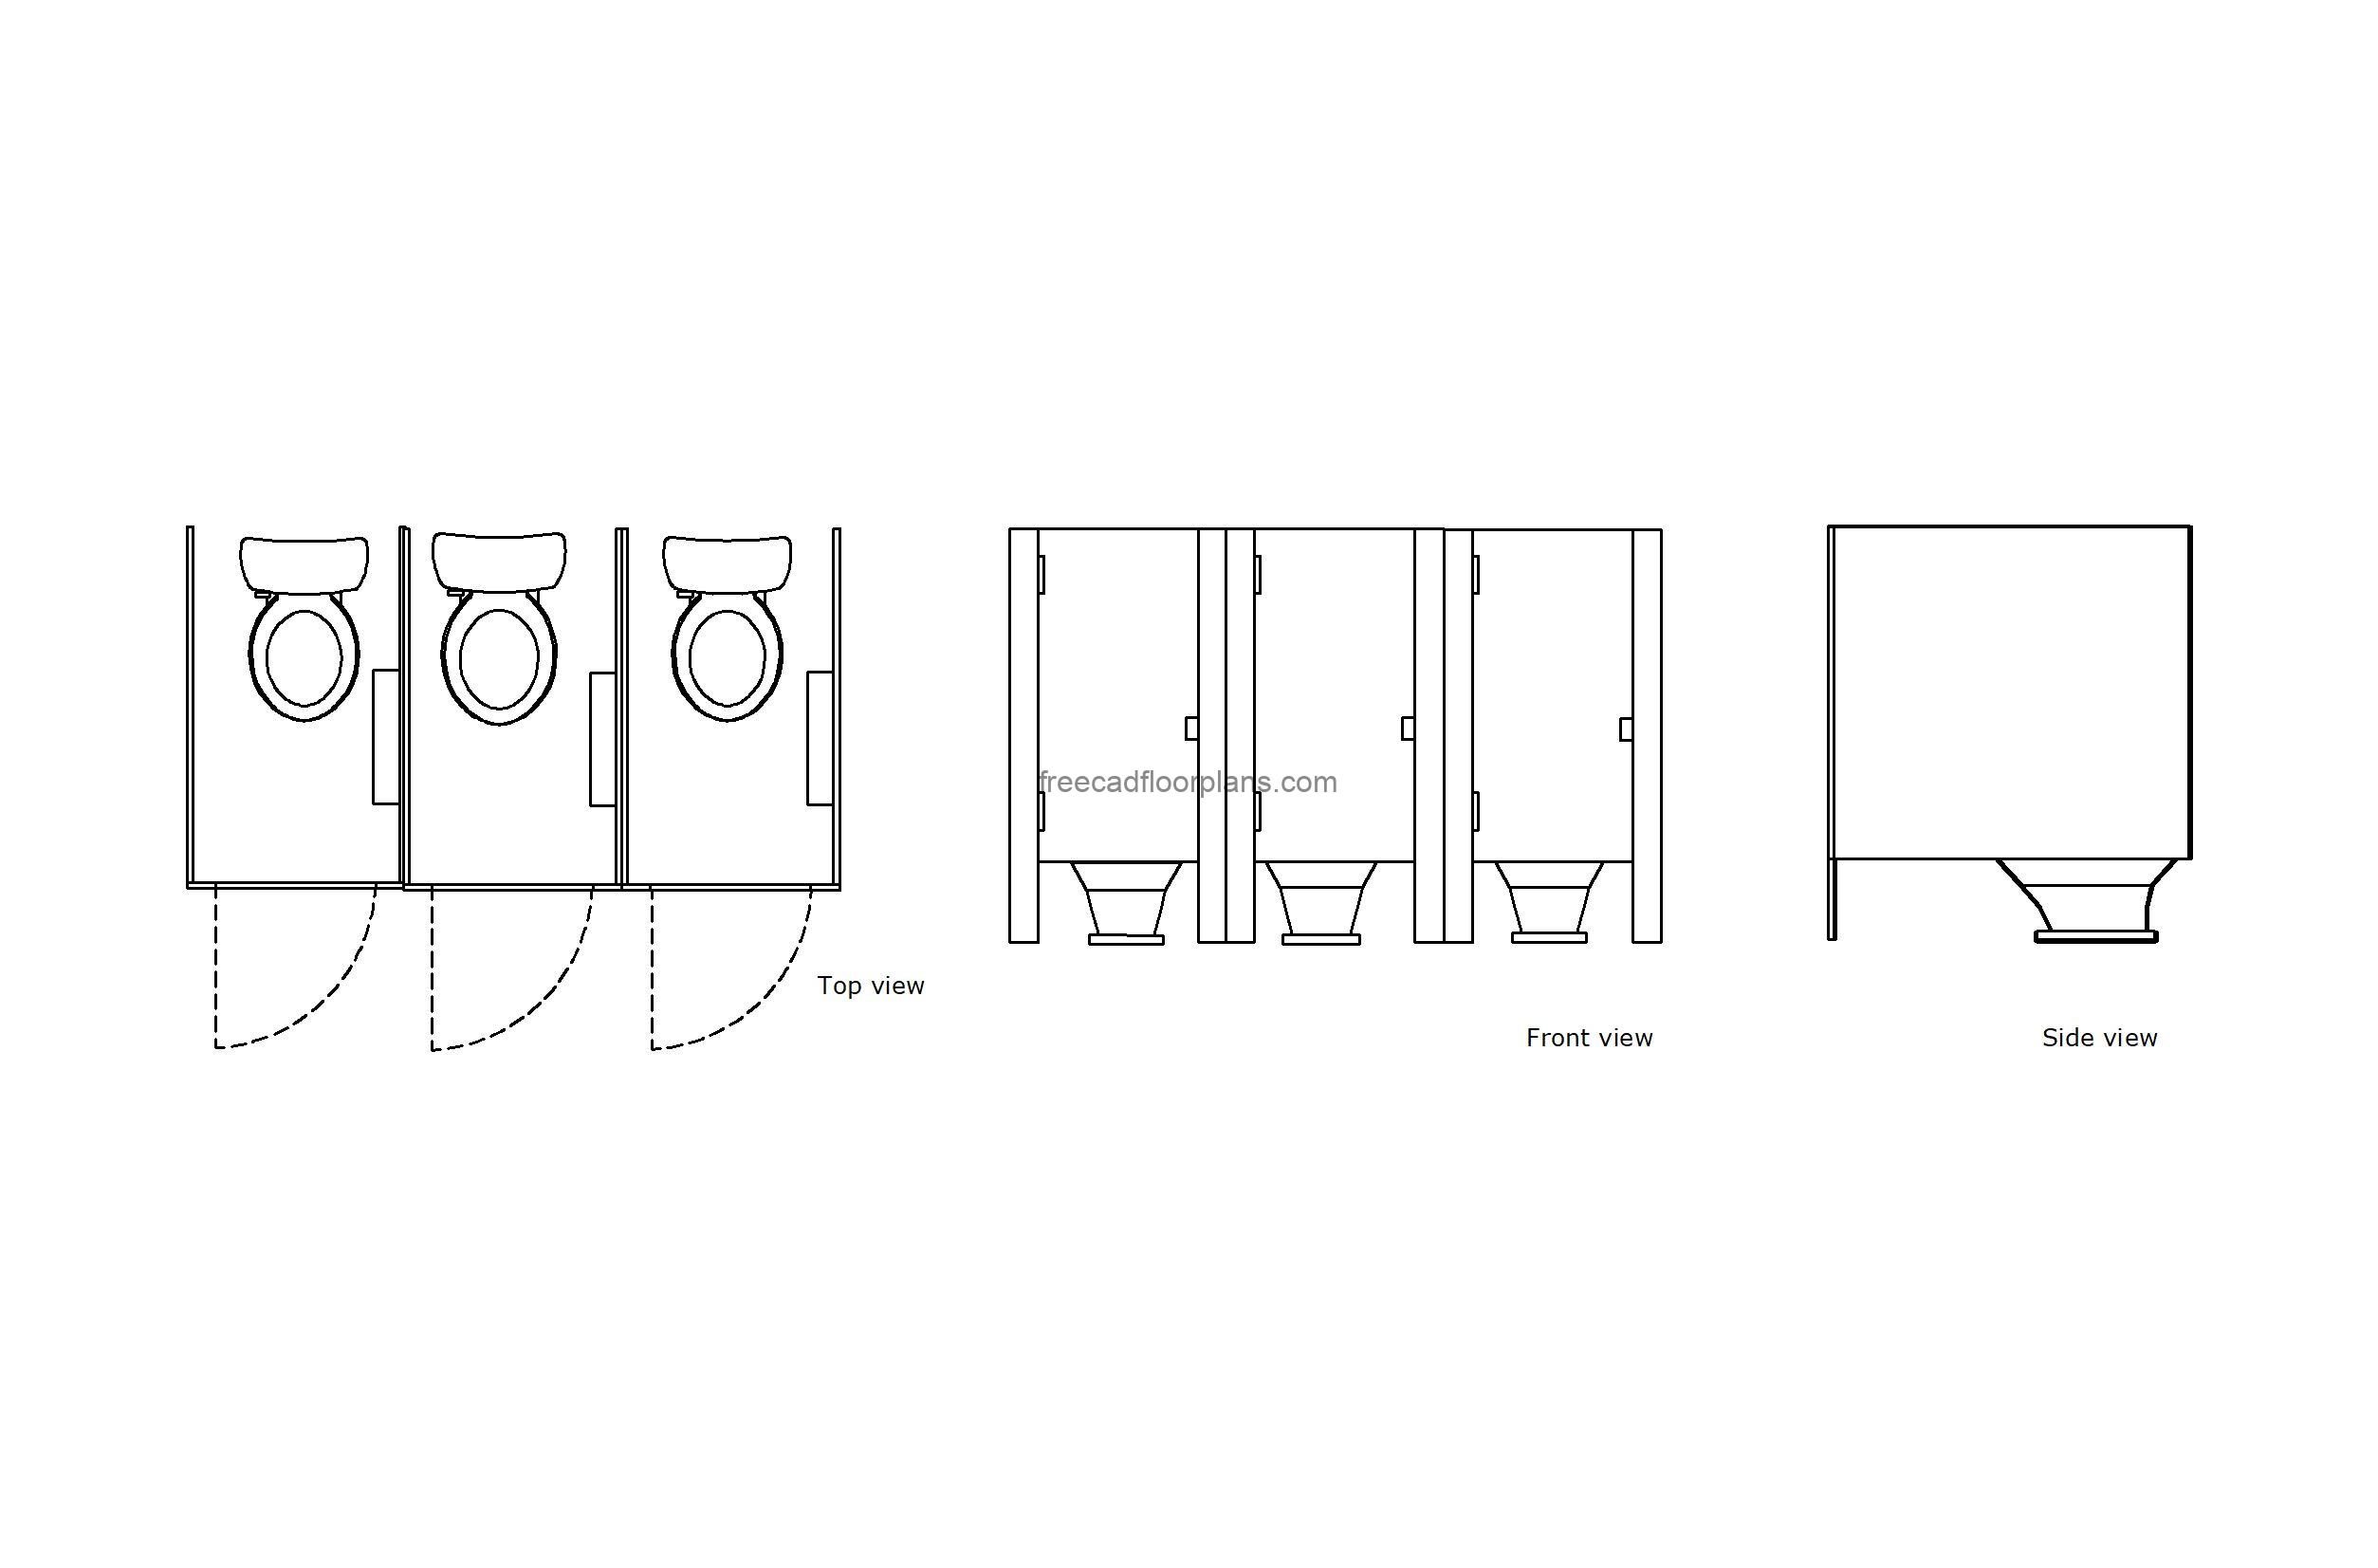 autocad drawing of a public toilet stall, plan and elevation 2d views, dwg file free for download